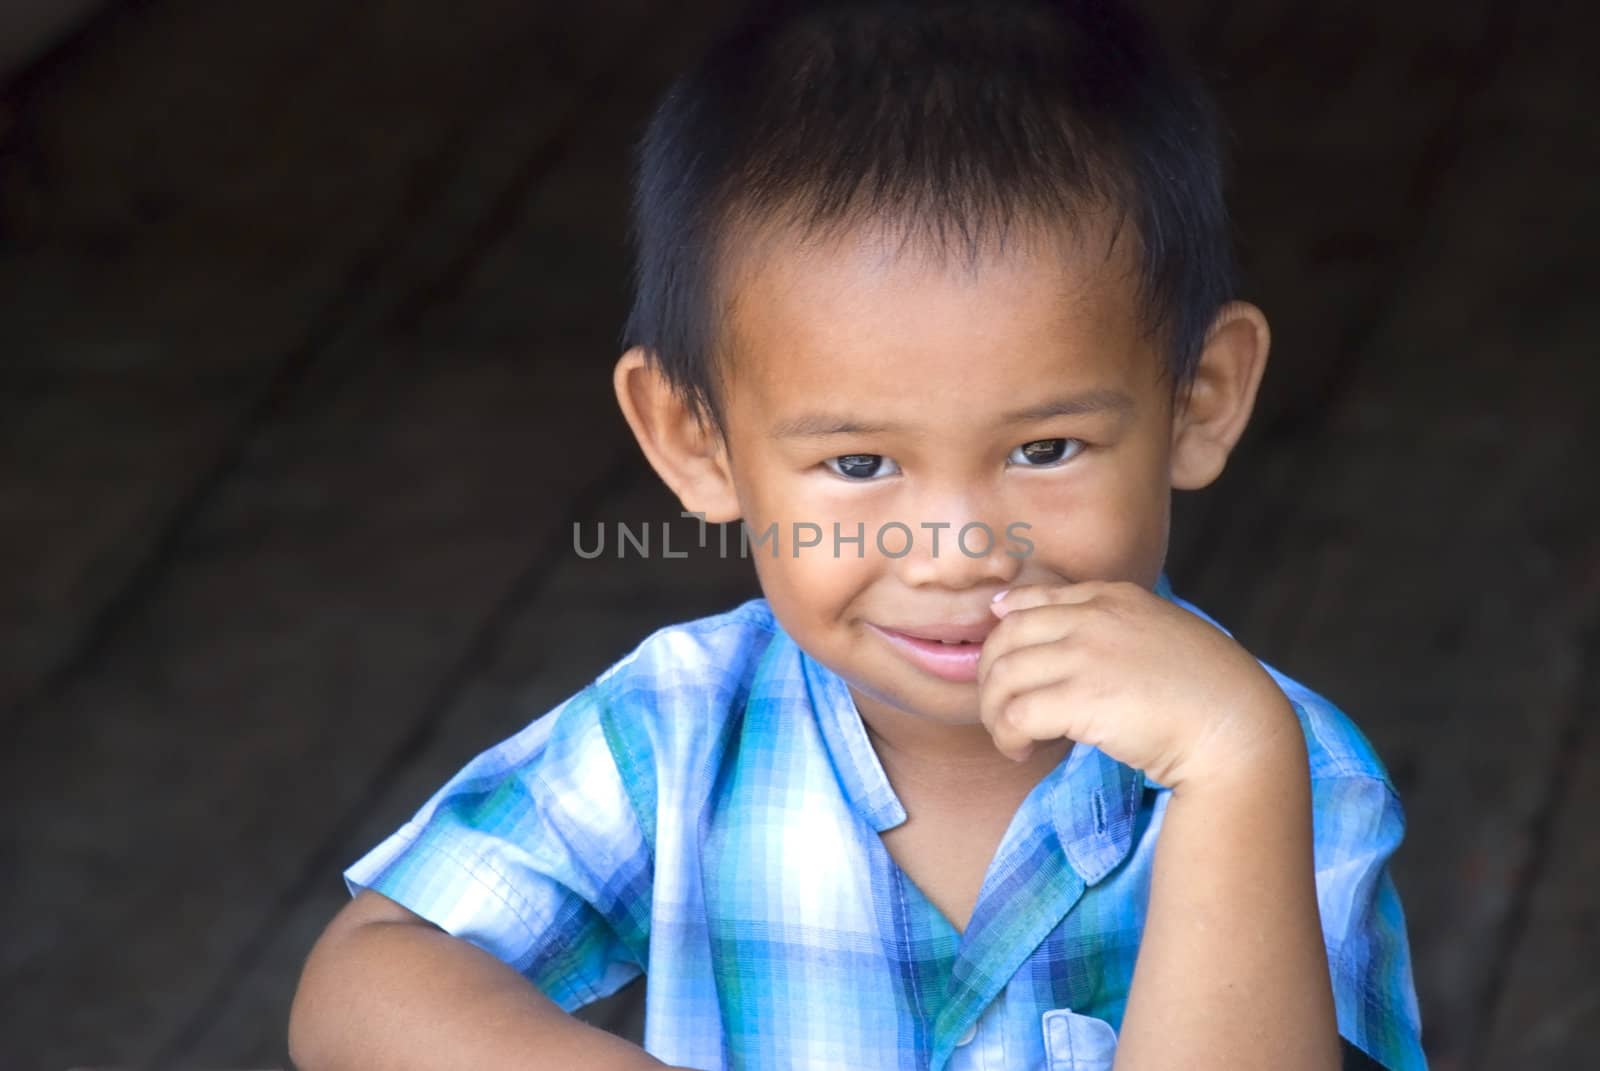 A young Asian boy wearing a blue shirt and smiling as he poses. Adobe RGB color profile.